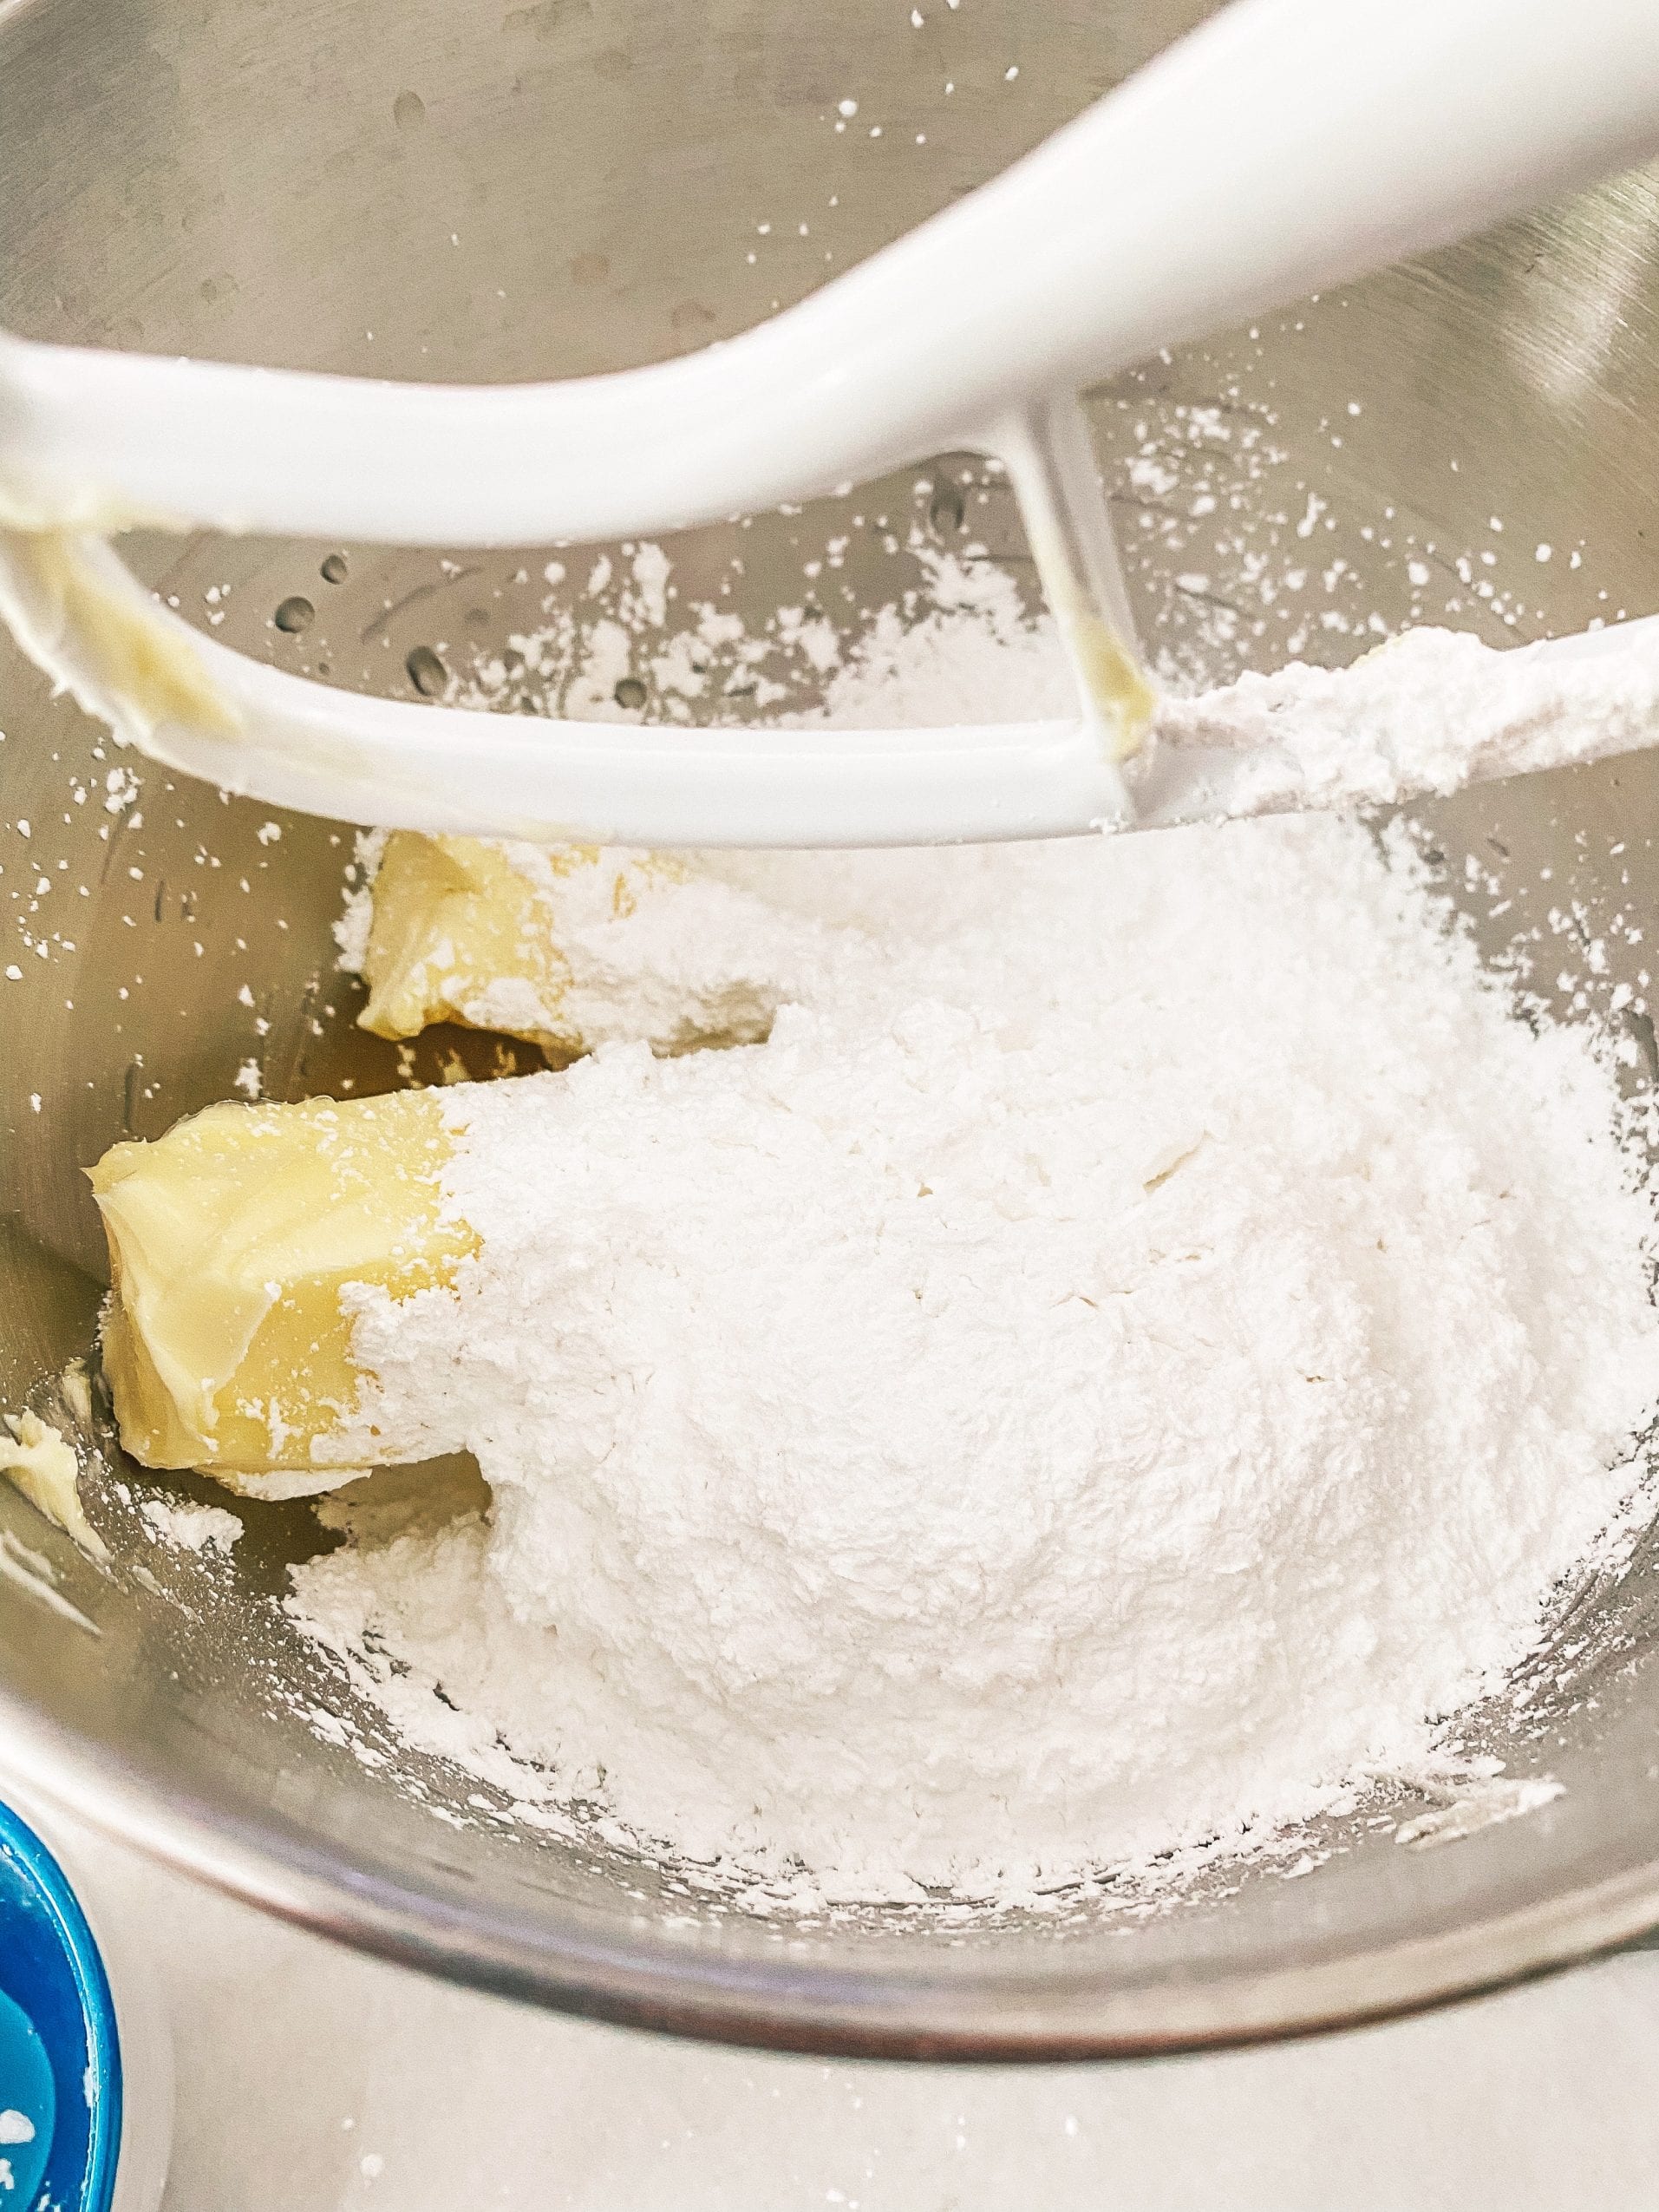 Adding butter and powdered sugar for buttercream